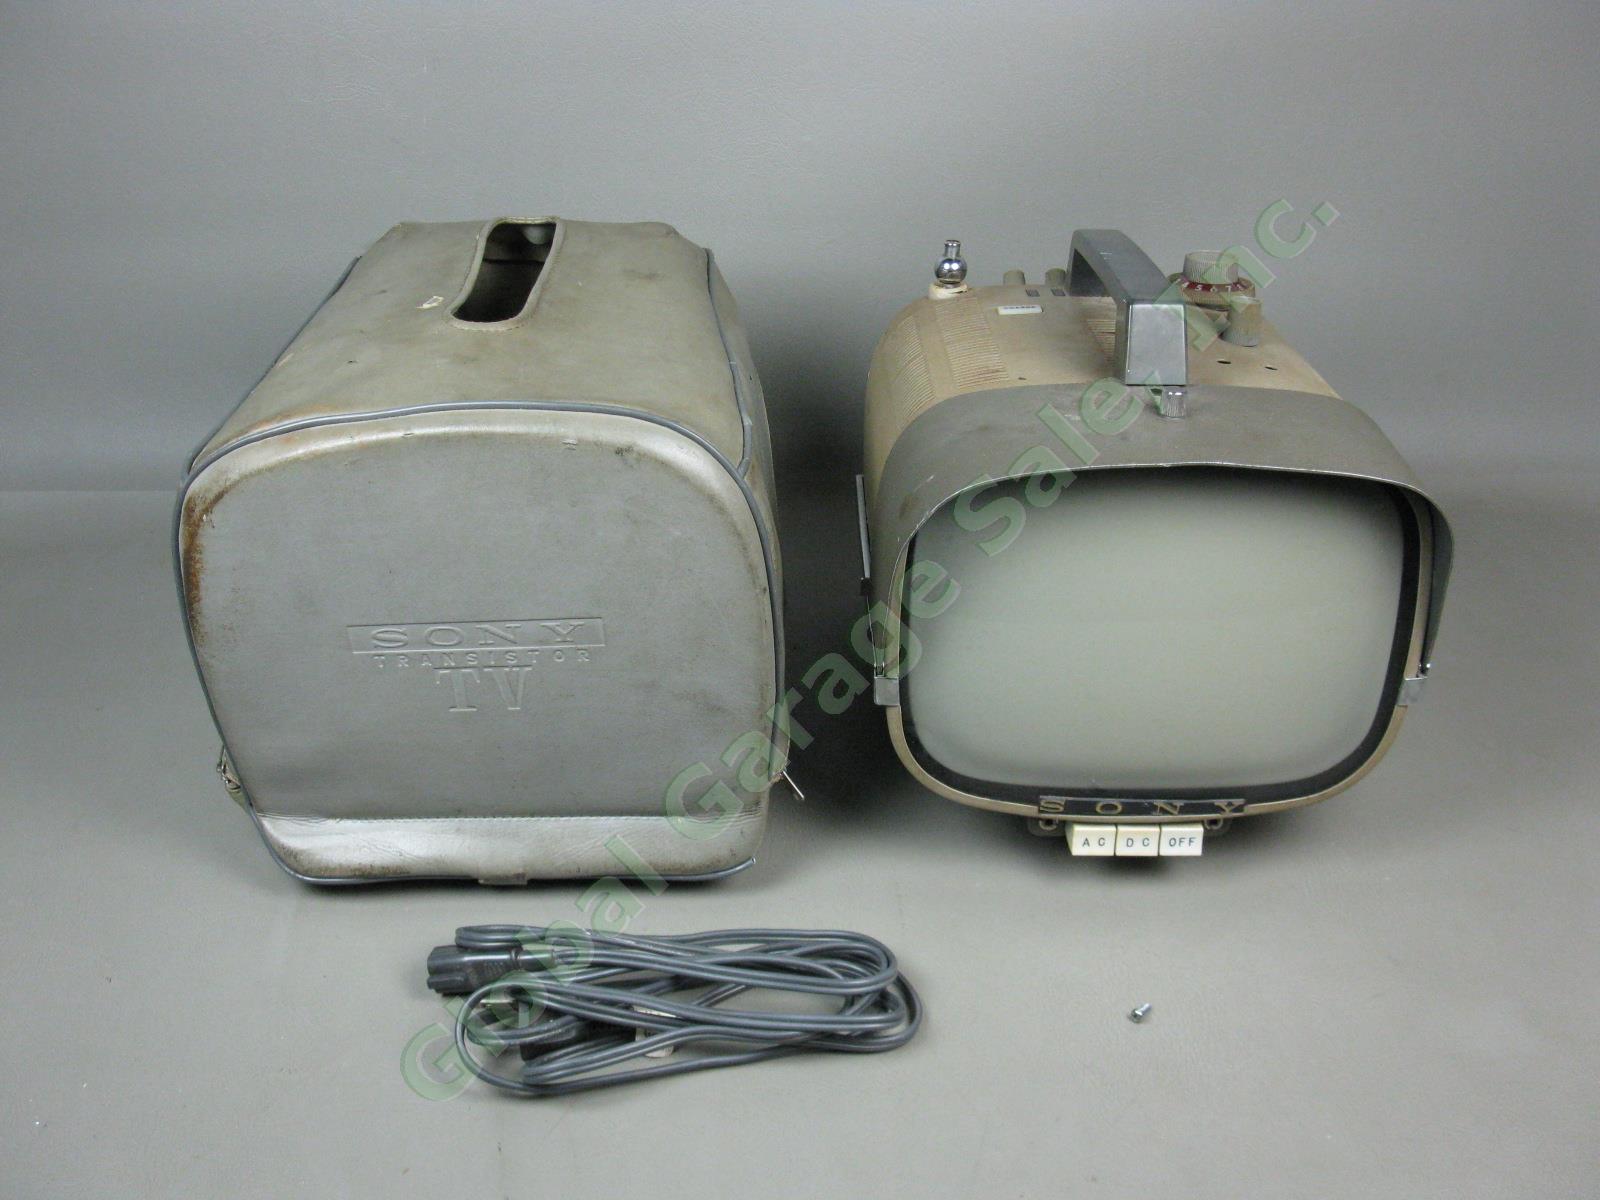 Rare Vtg 1961 Sony 8-301W 1st Portable Television Space Age TV Receiver Bundle